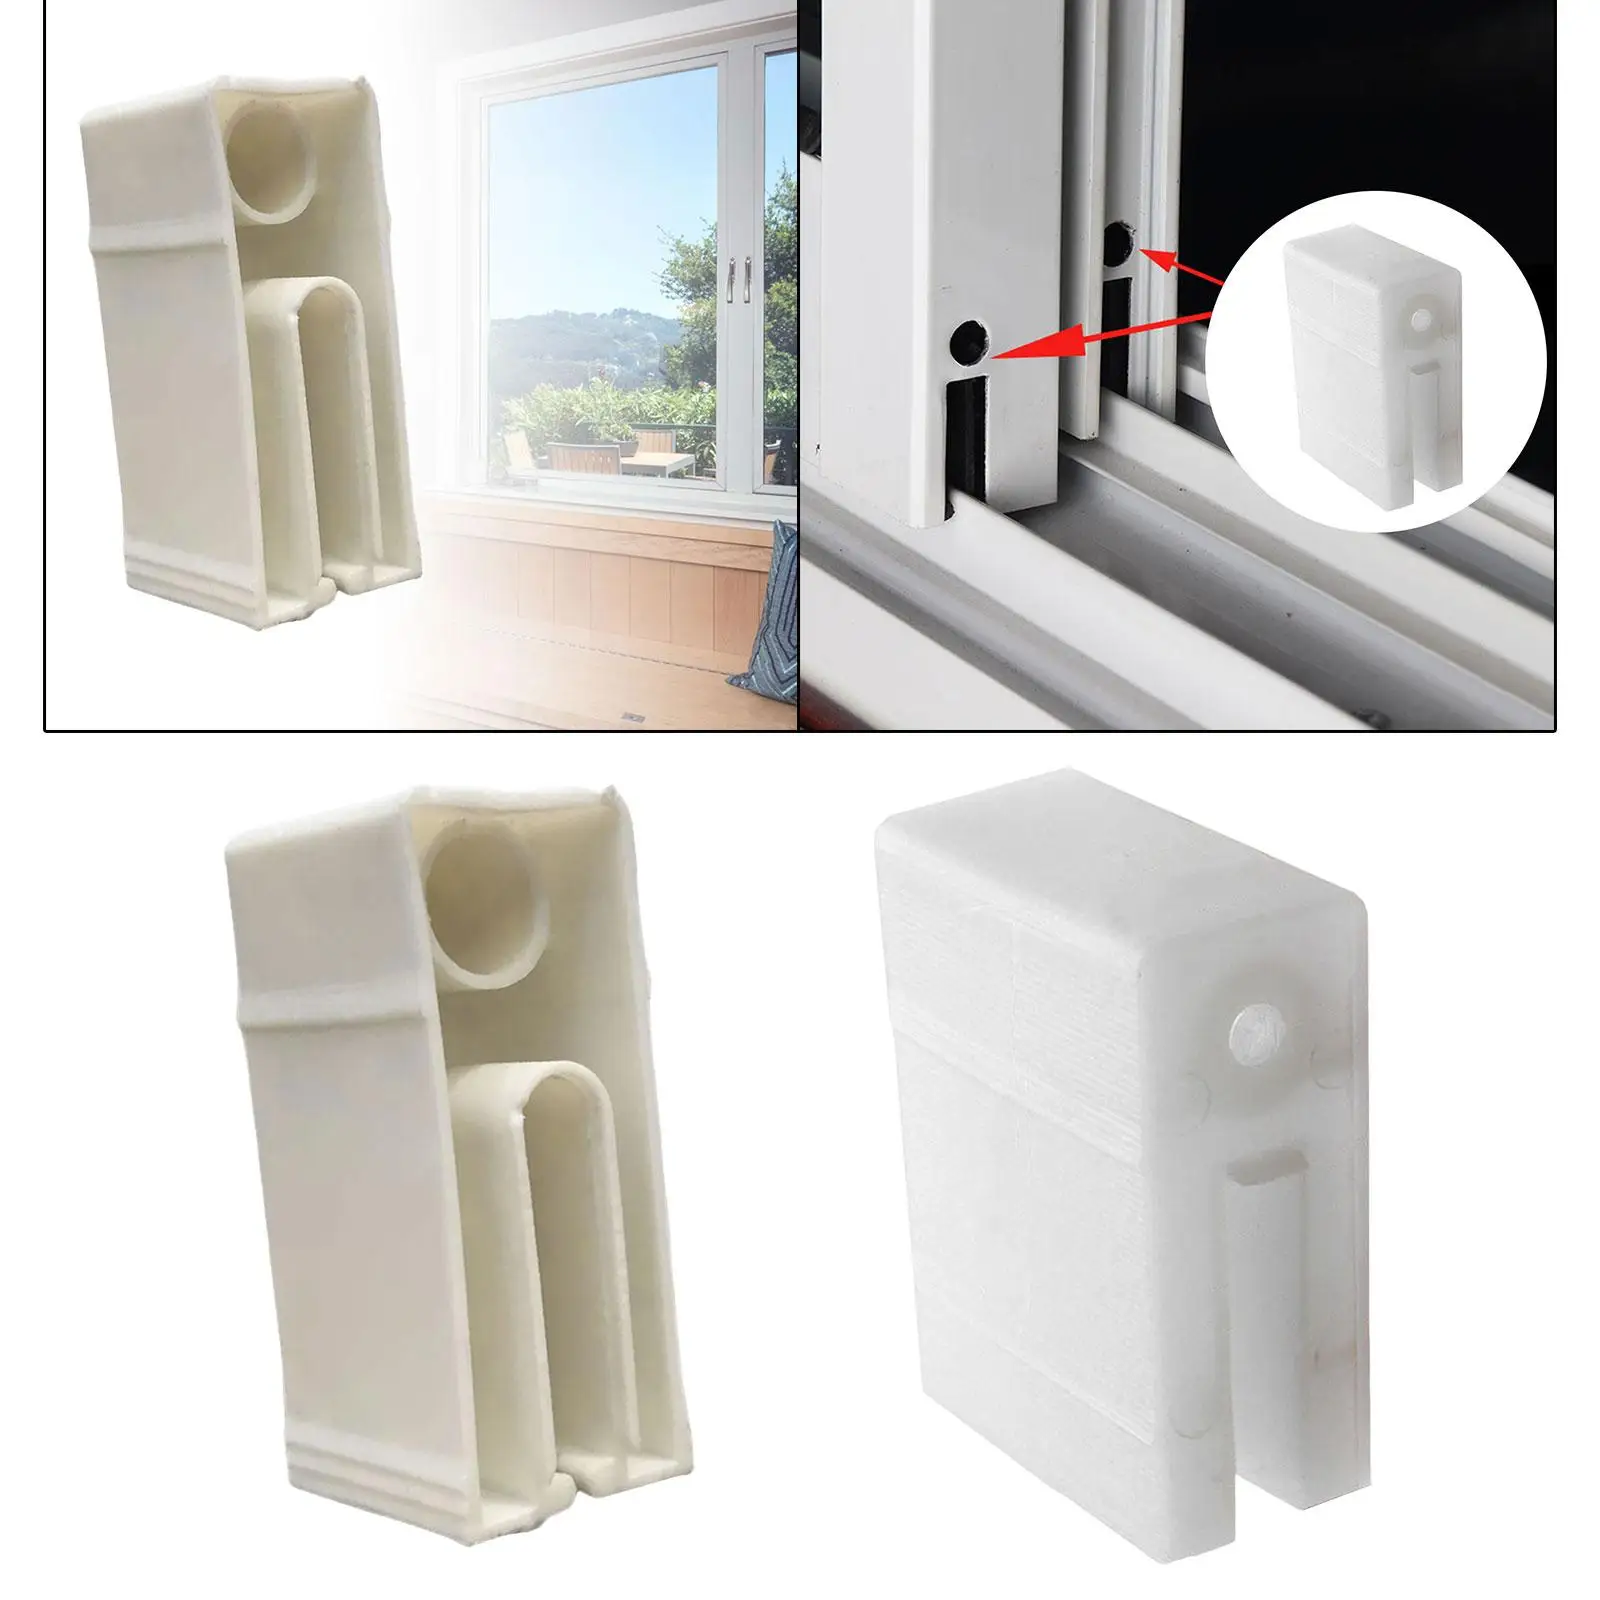 Sliding Window and Door Blocks Replacement Part Easy to Install Window Accessory for Windows Offices Household Doors Shops